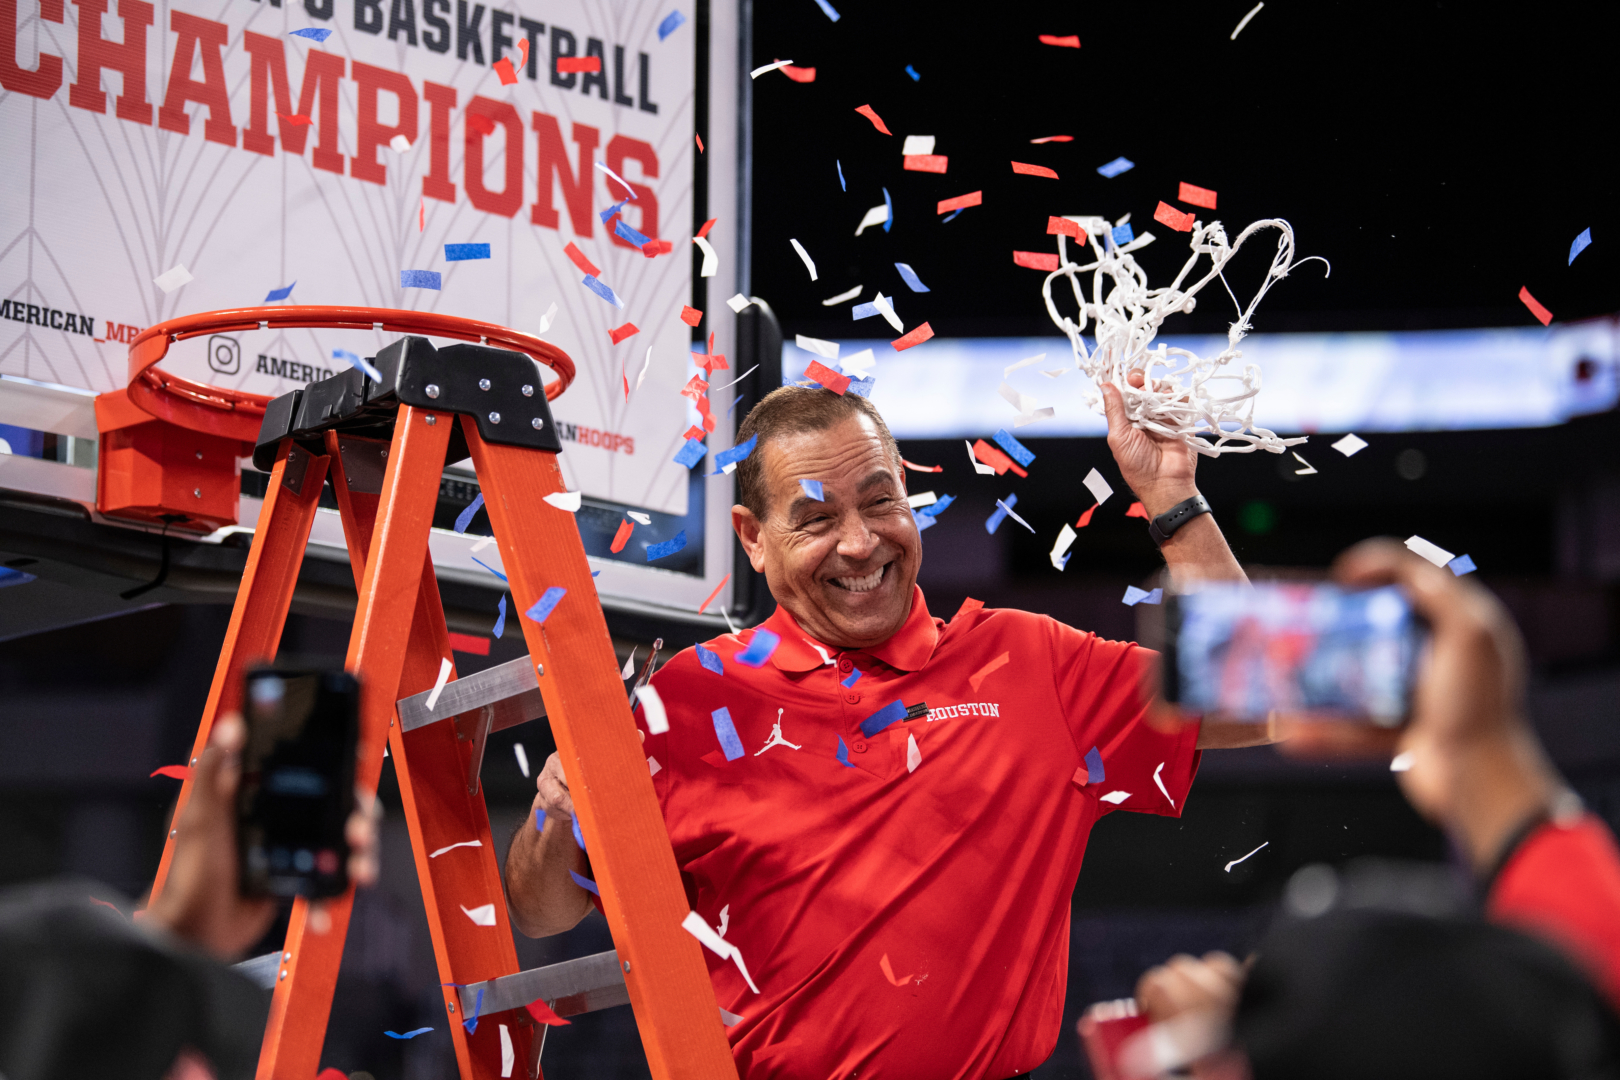 Kelvin Sampson cuts down the net as he celebrates UH basketball's 2021 AAC Tournament title | Courtesy of Ben Solomon/AAC